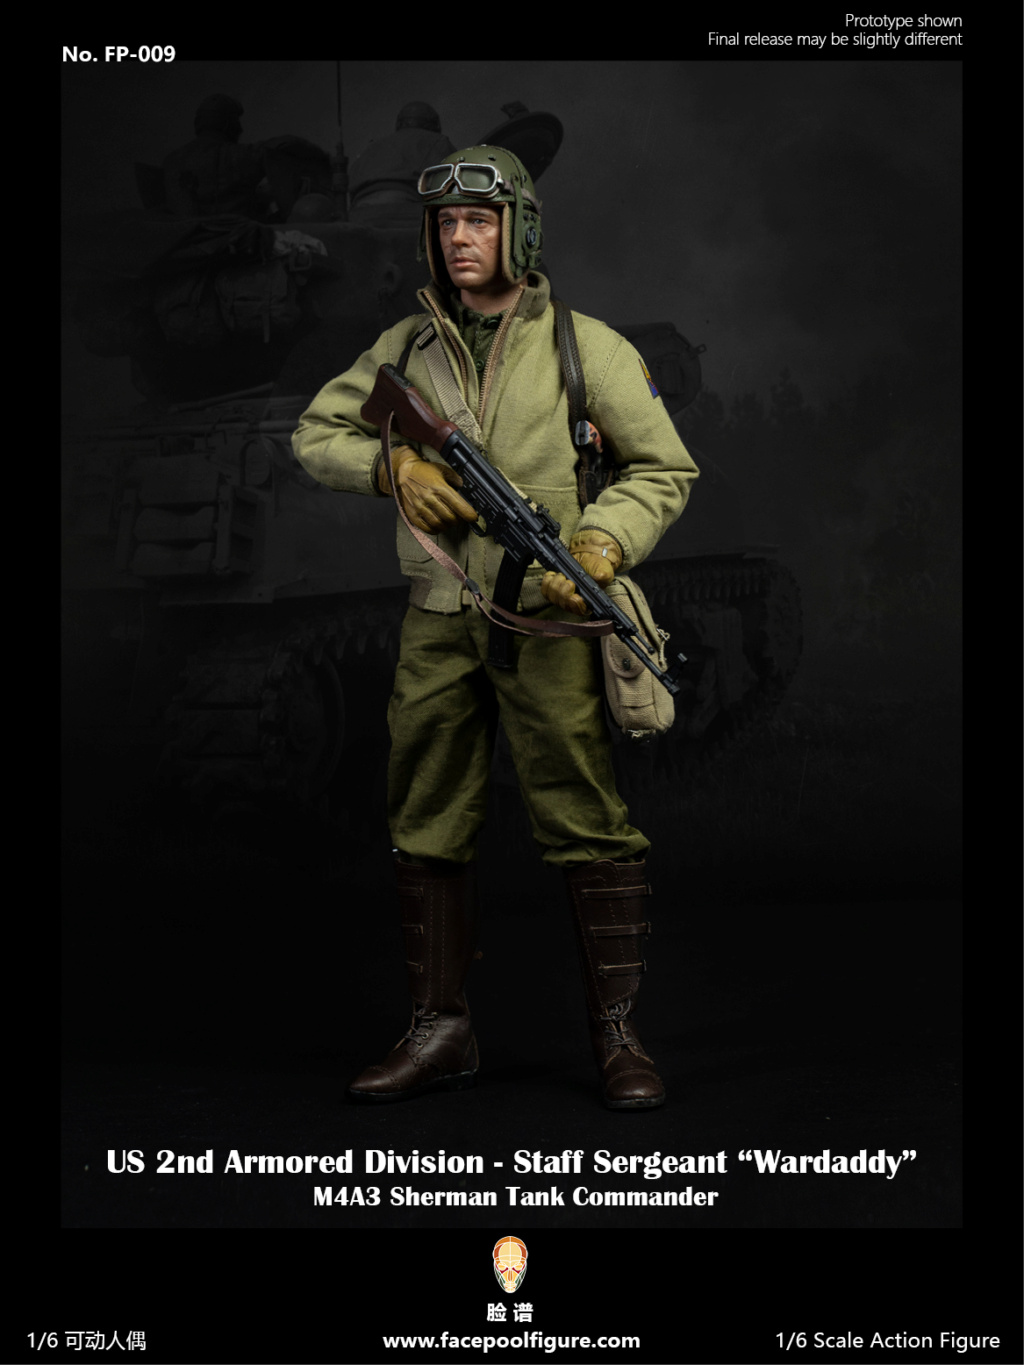 Wardaddy - NEW PRODUCT: Facepool Figure: 1/6 2nd Armored Division Staff Sergeant 2nd Panzer Division #Wardaddy) 18385410